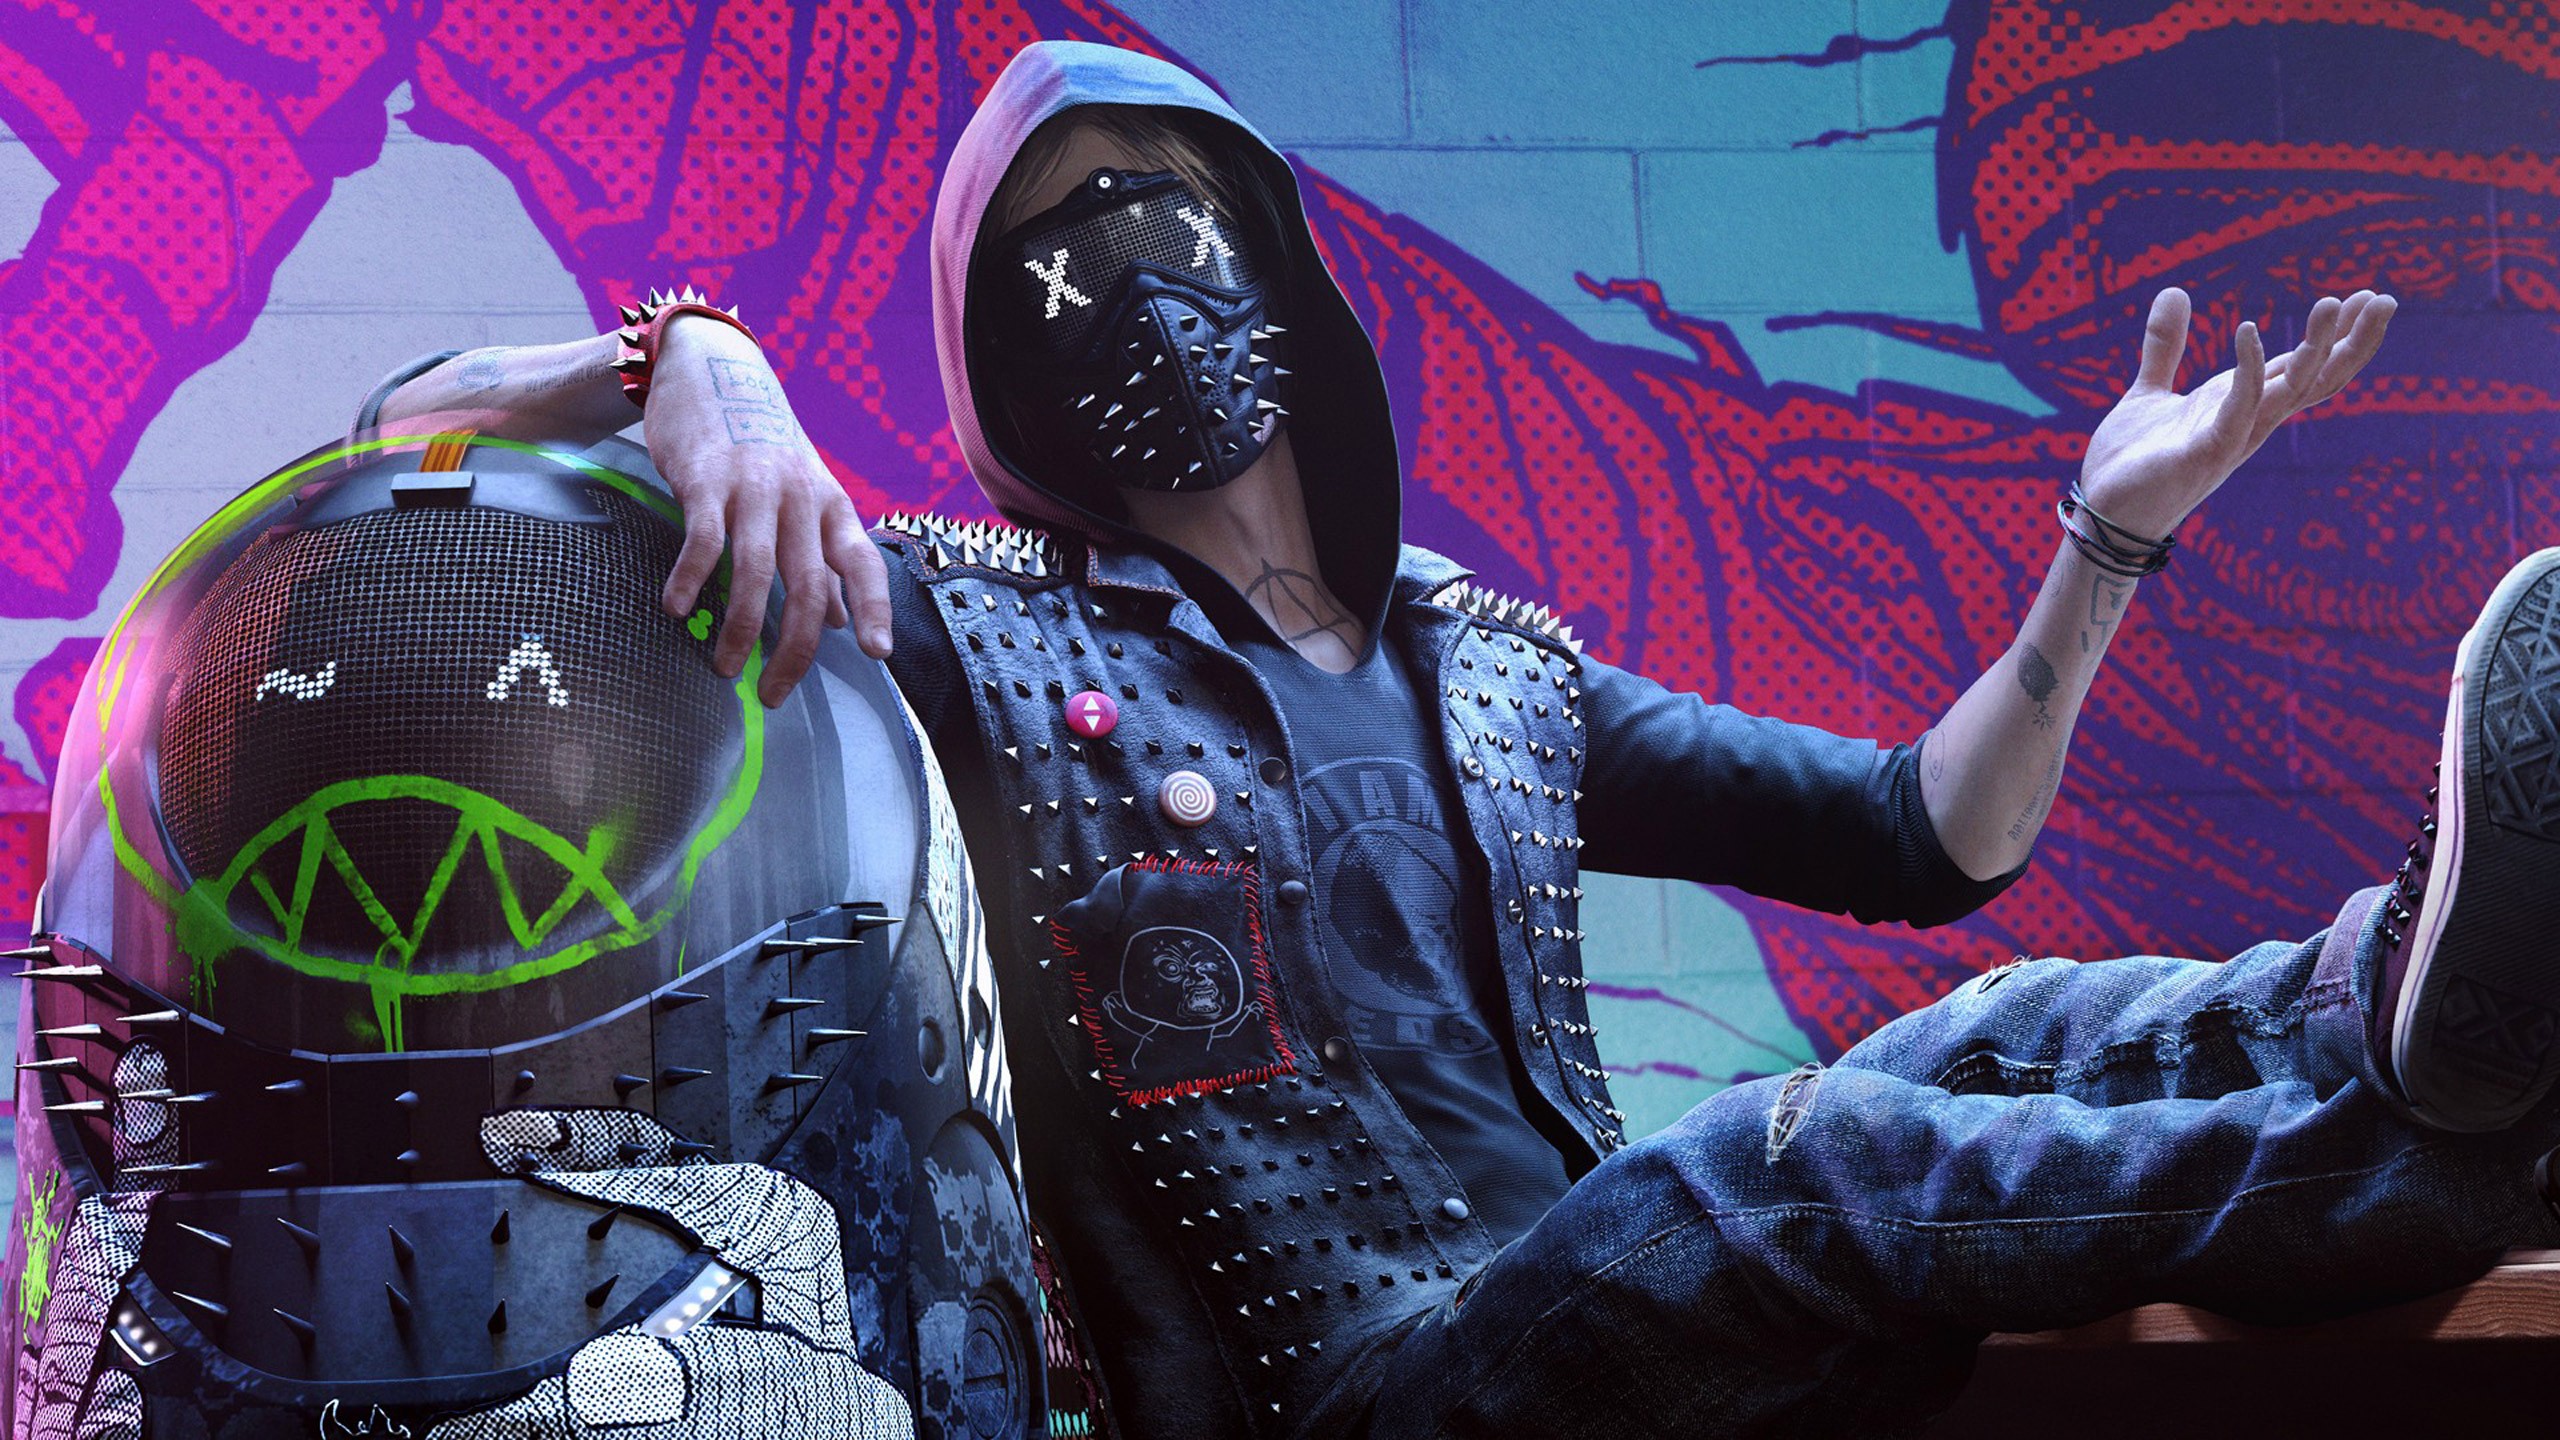 how to download watch dogs 2 pc with samsung